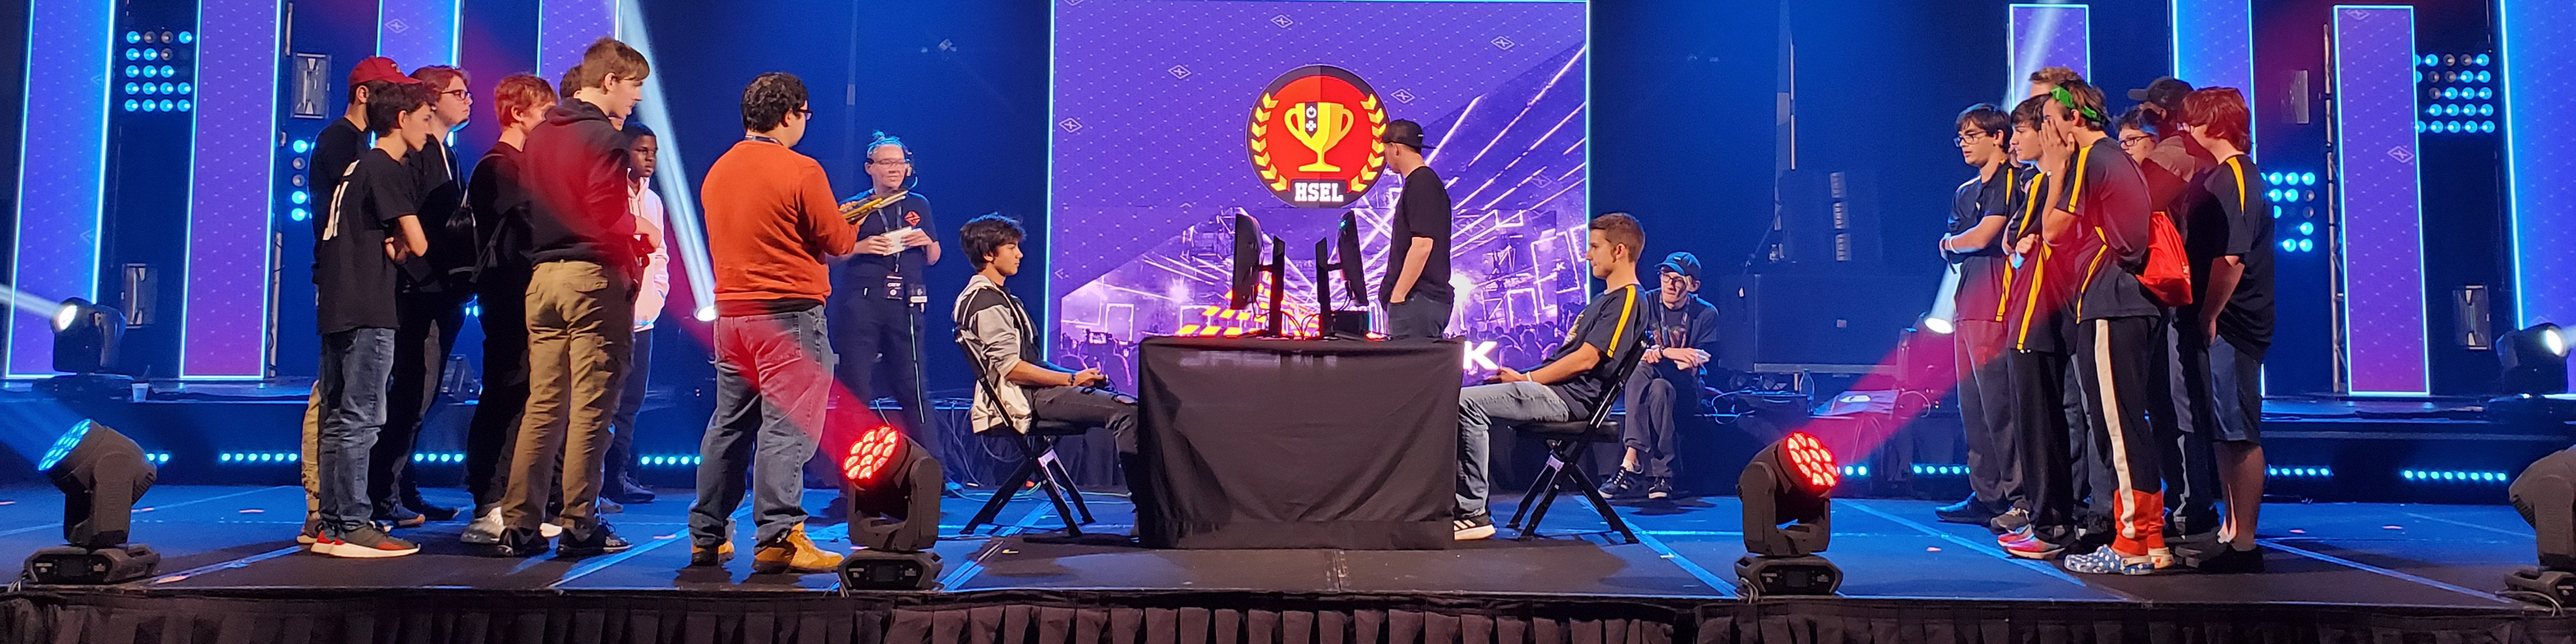 two teams of all male high school e sports gamers compete on a stage